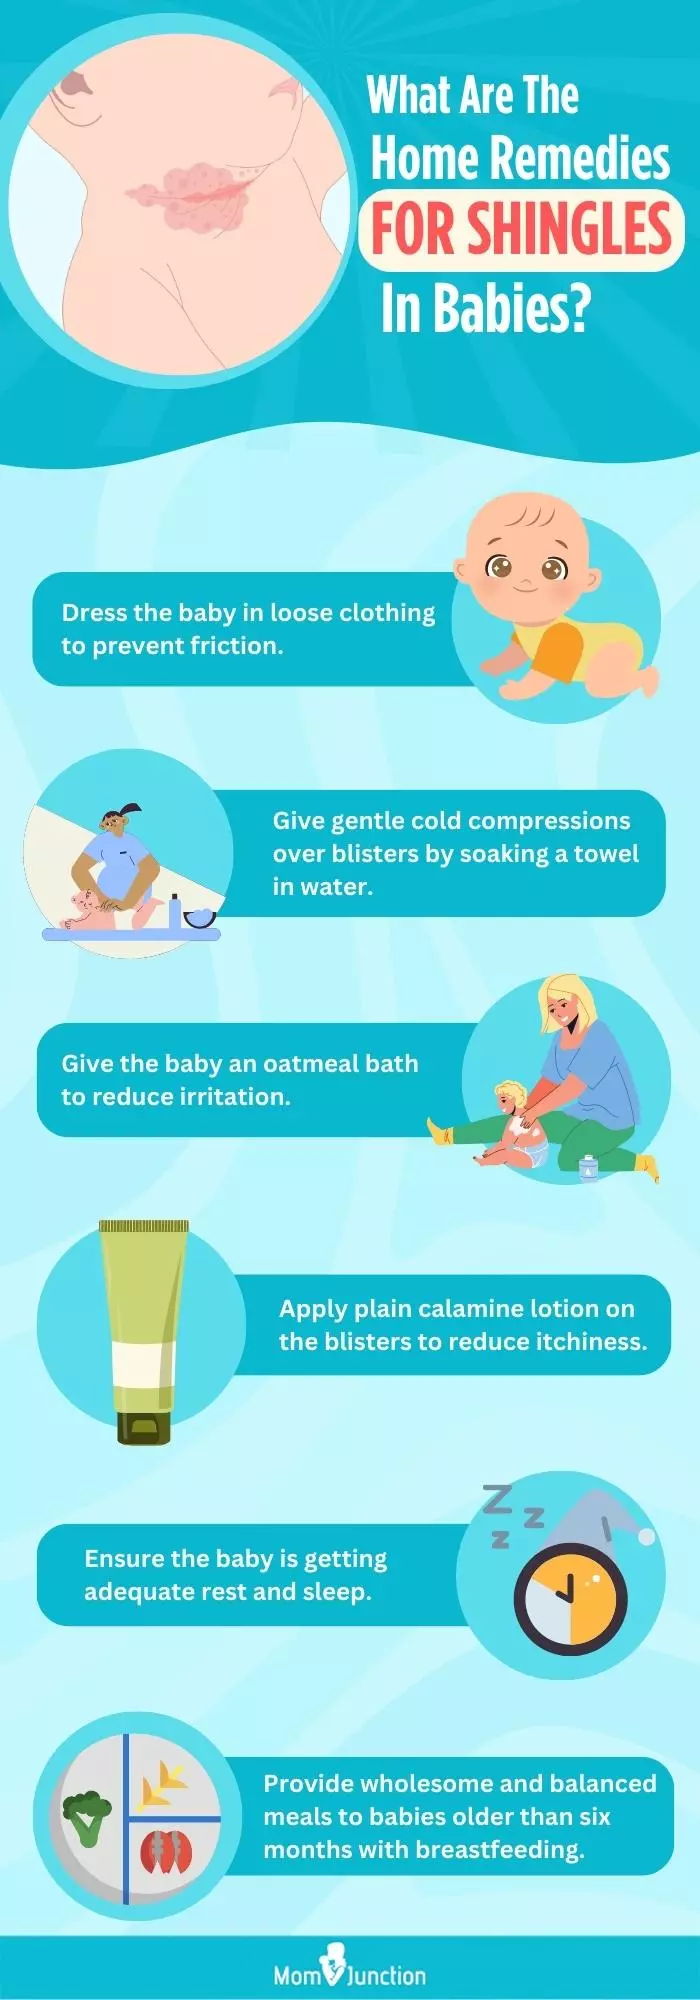 what are the home remedies for shingles in babies (infographic)